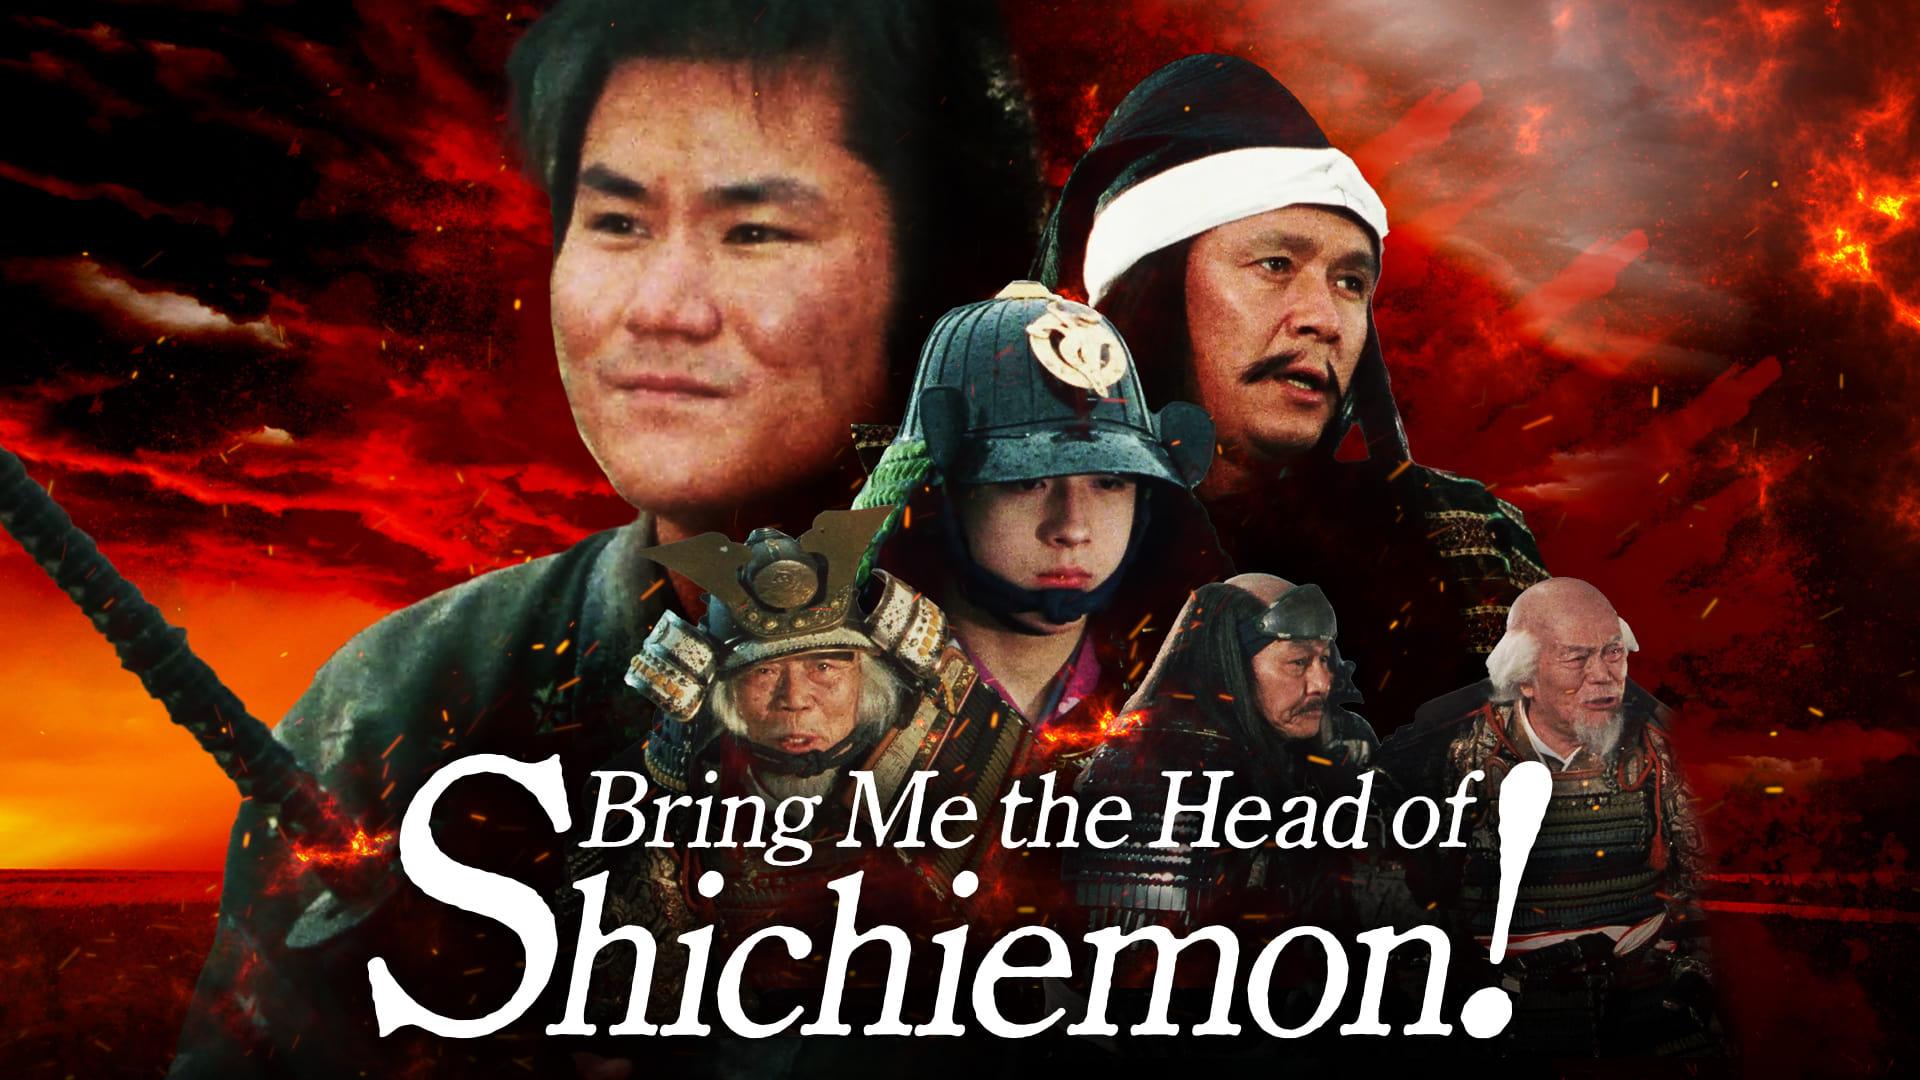 Bring Me the Head of Shichiemon! backdrop